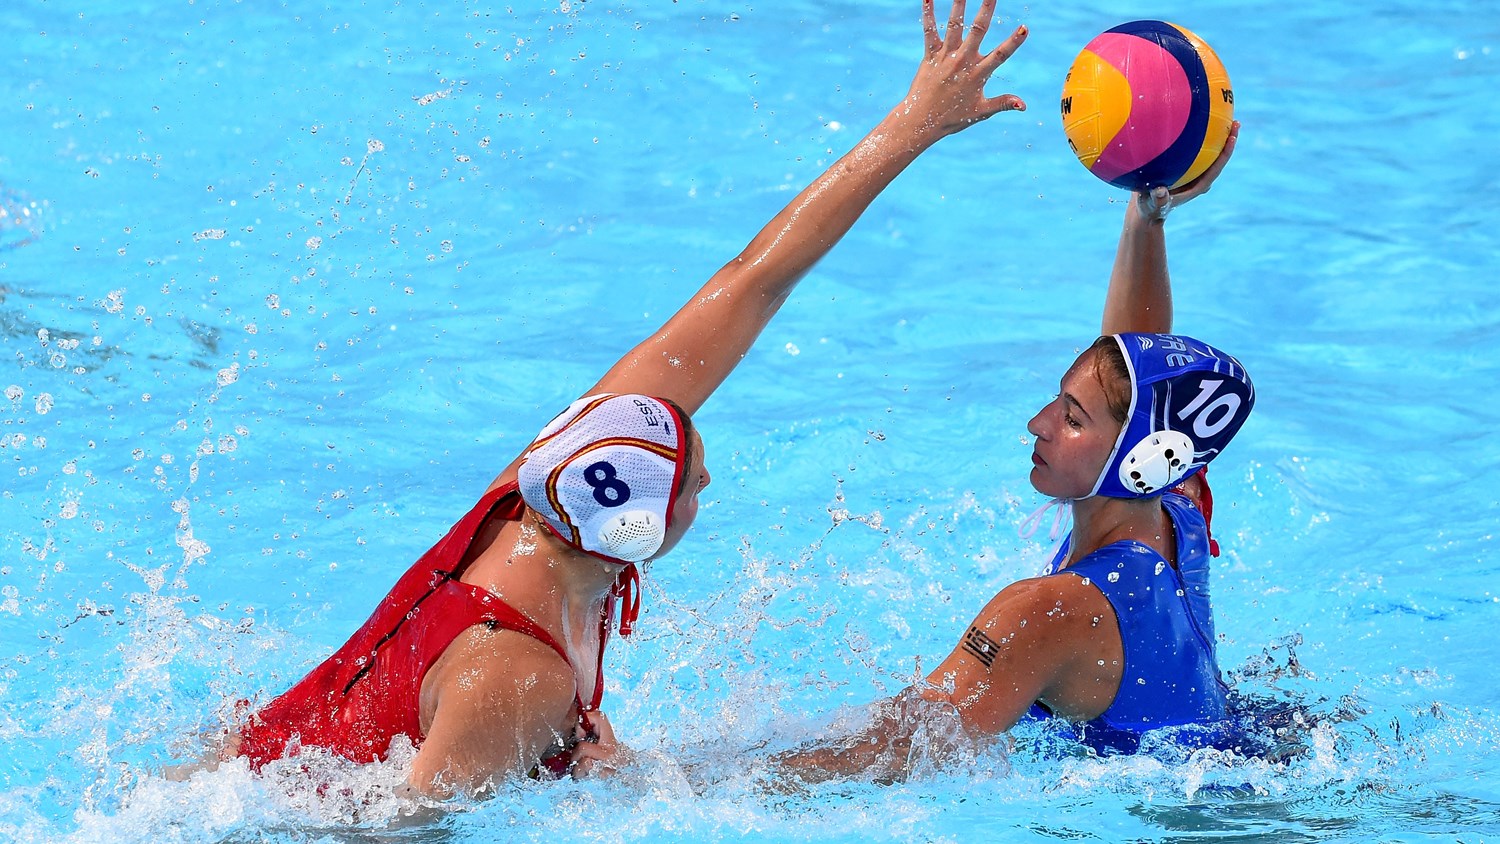 Spain and Russia to fight for women's Water Polo gold